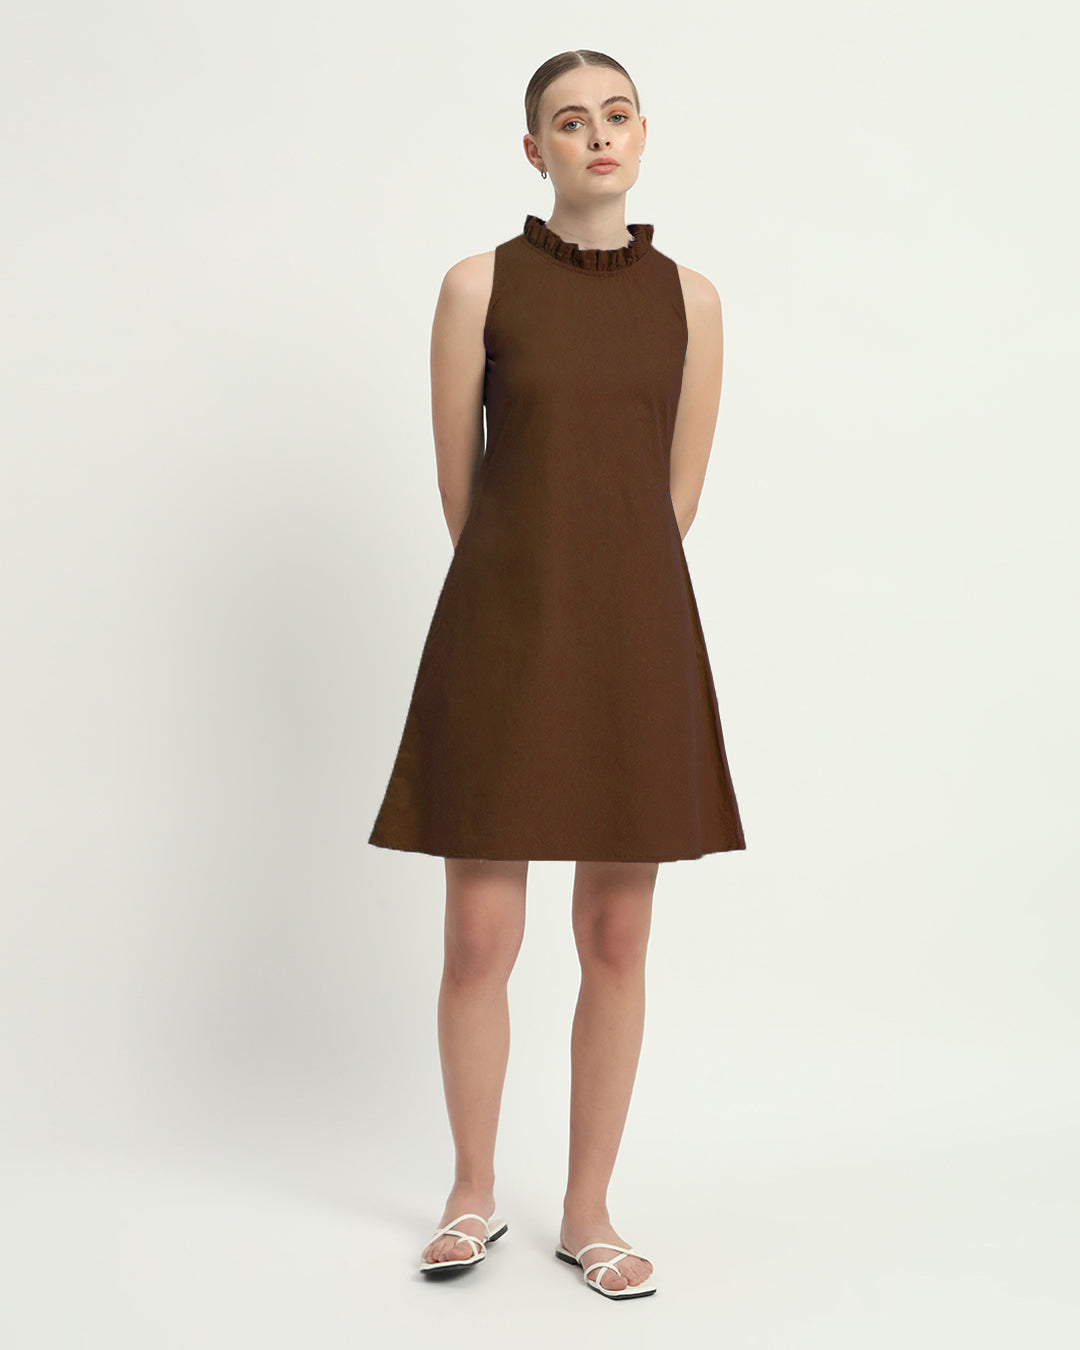 The Angelica Nutshell Cotton Dress